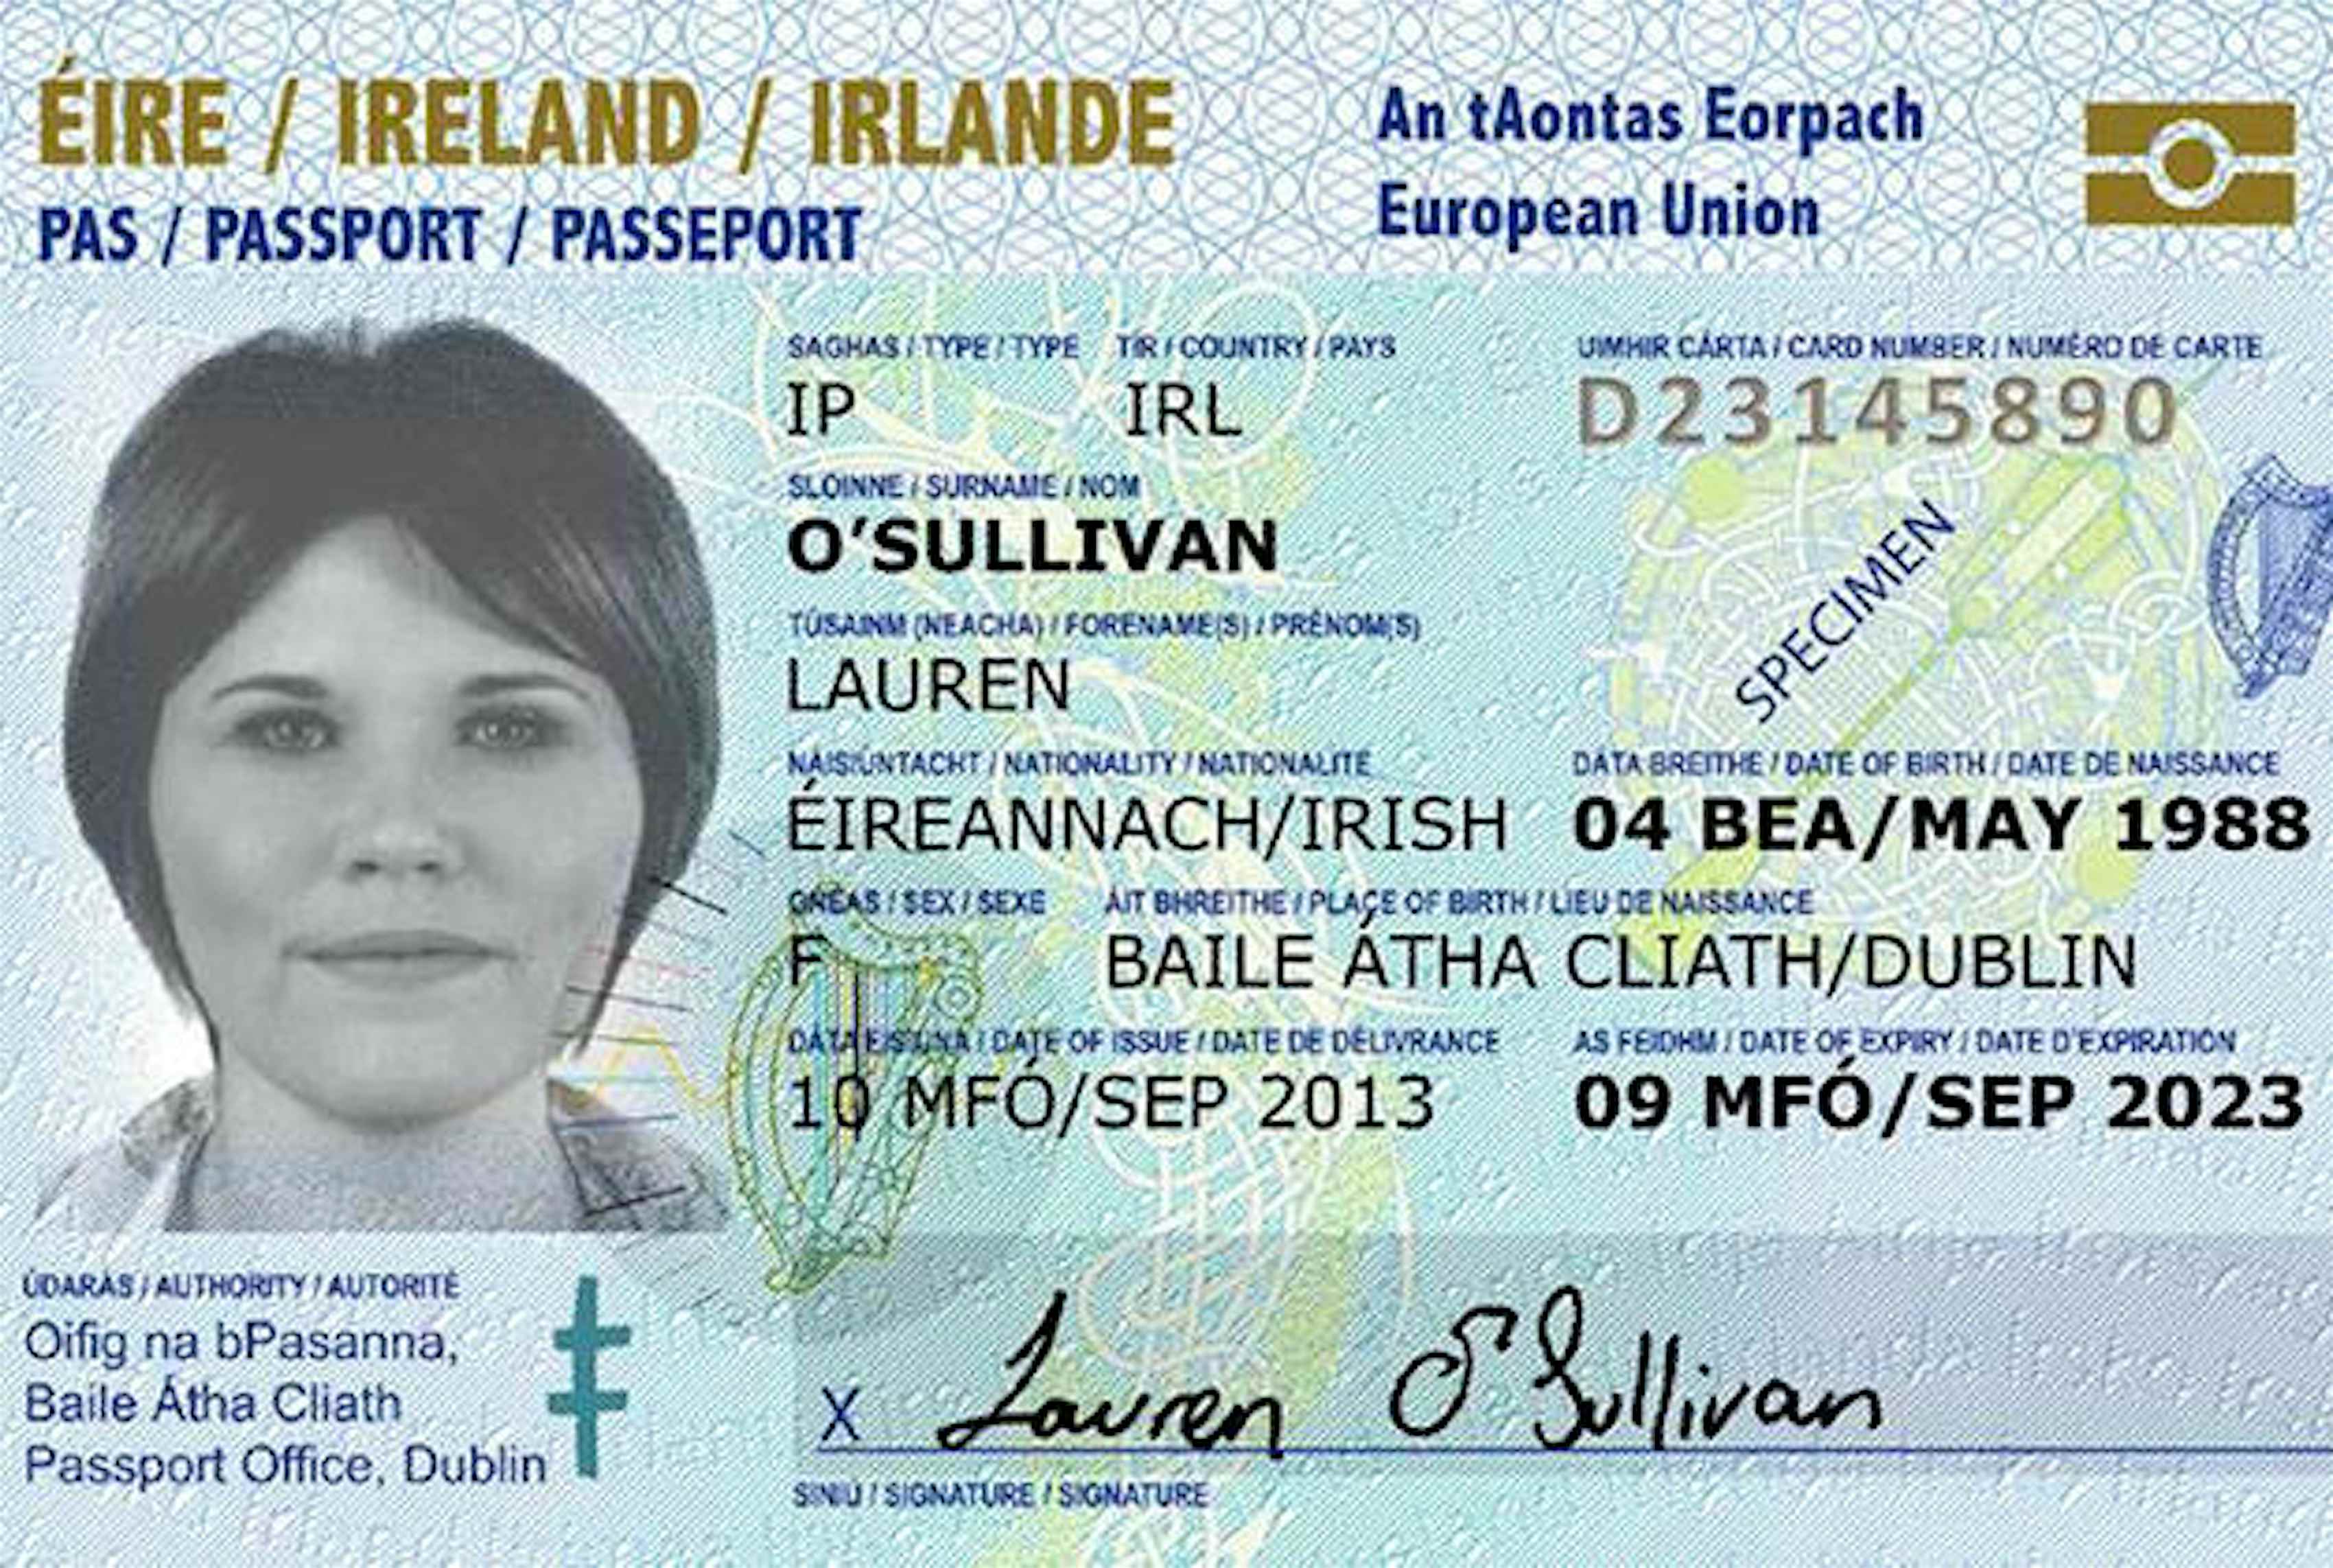 is id card enough to travel in europe